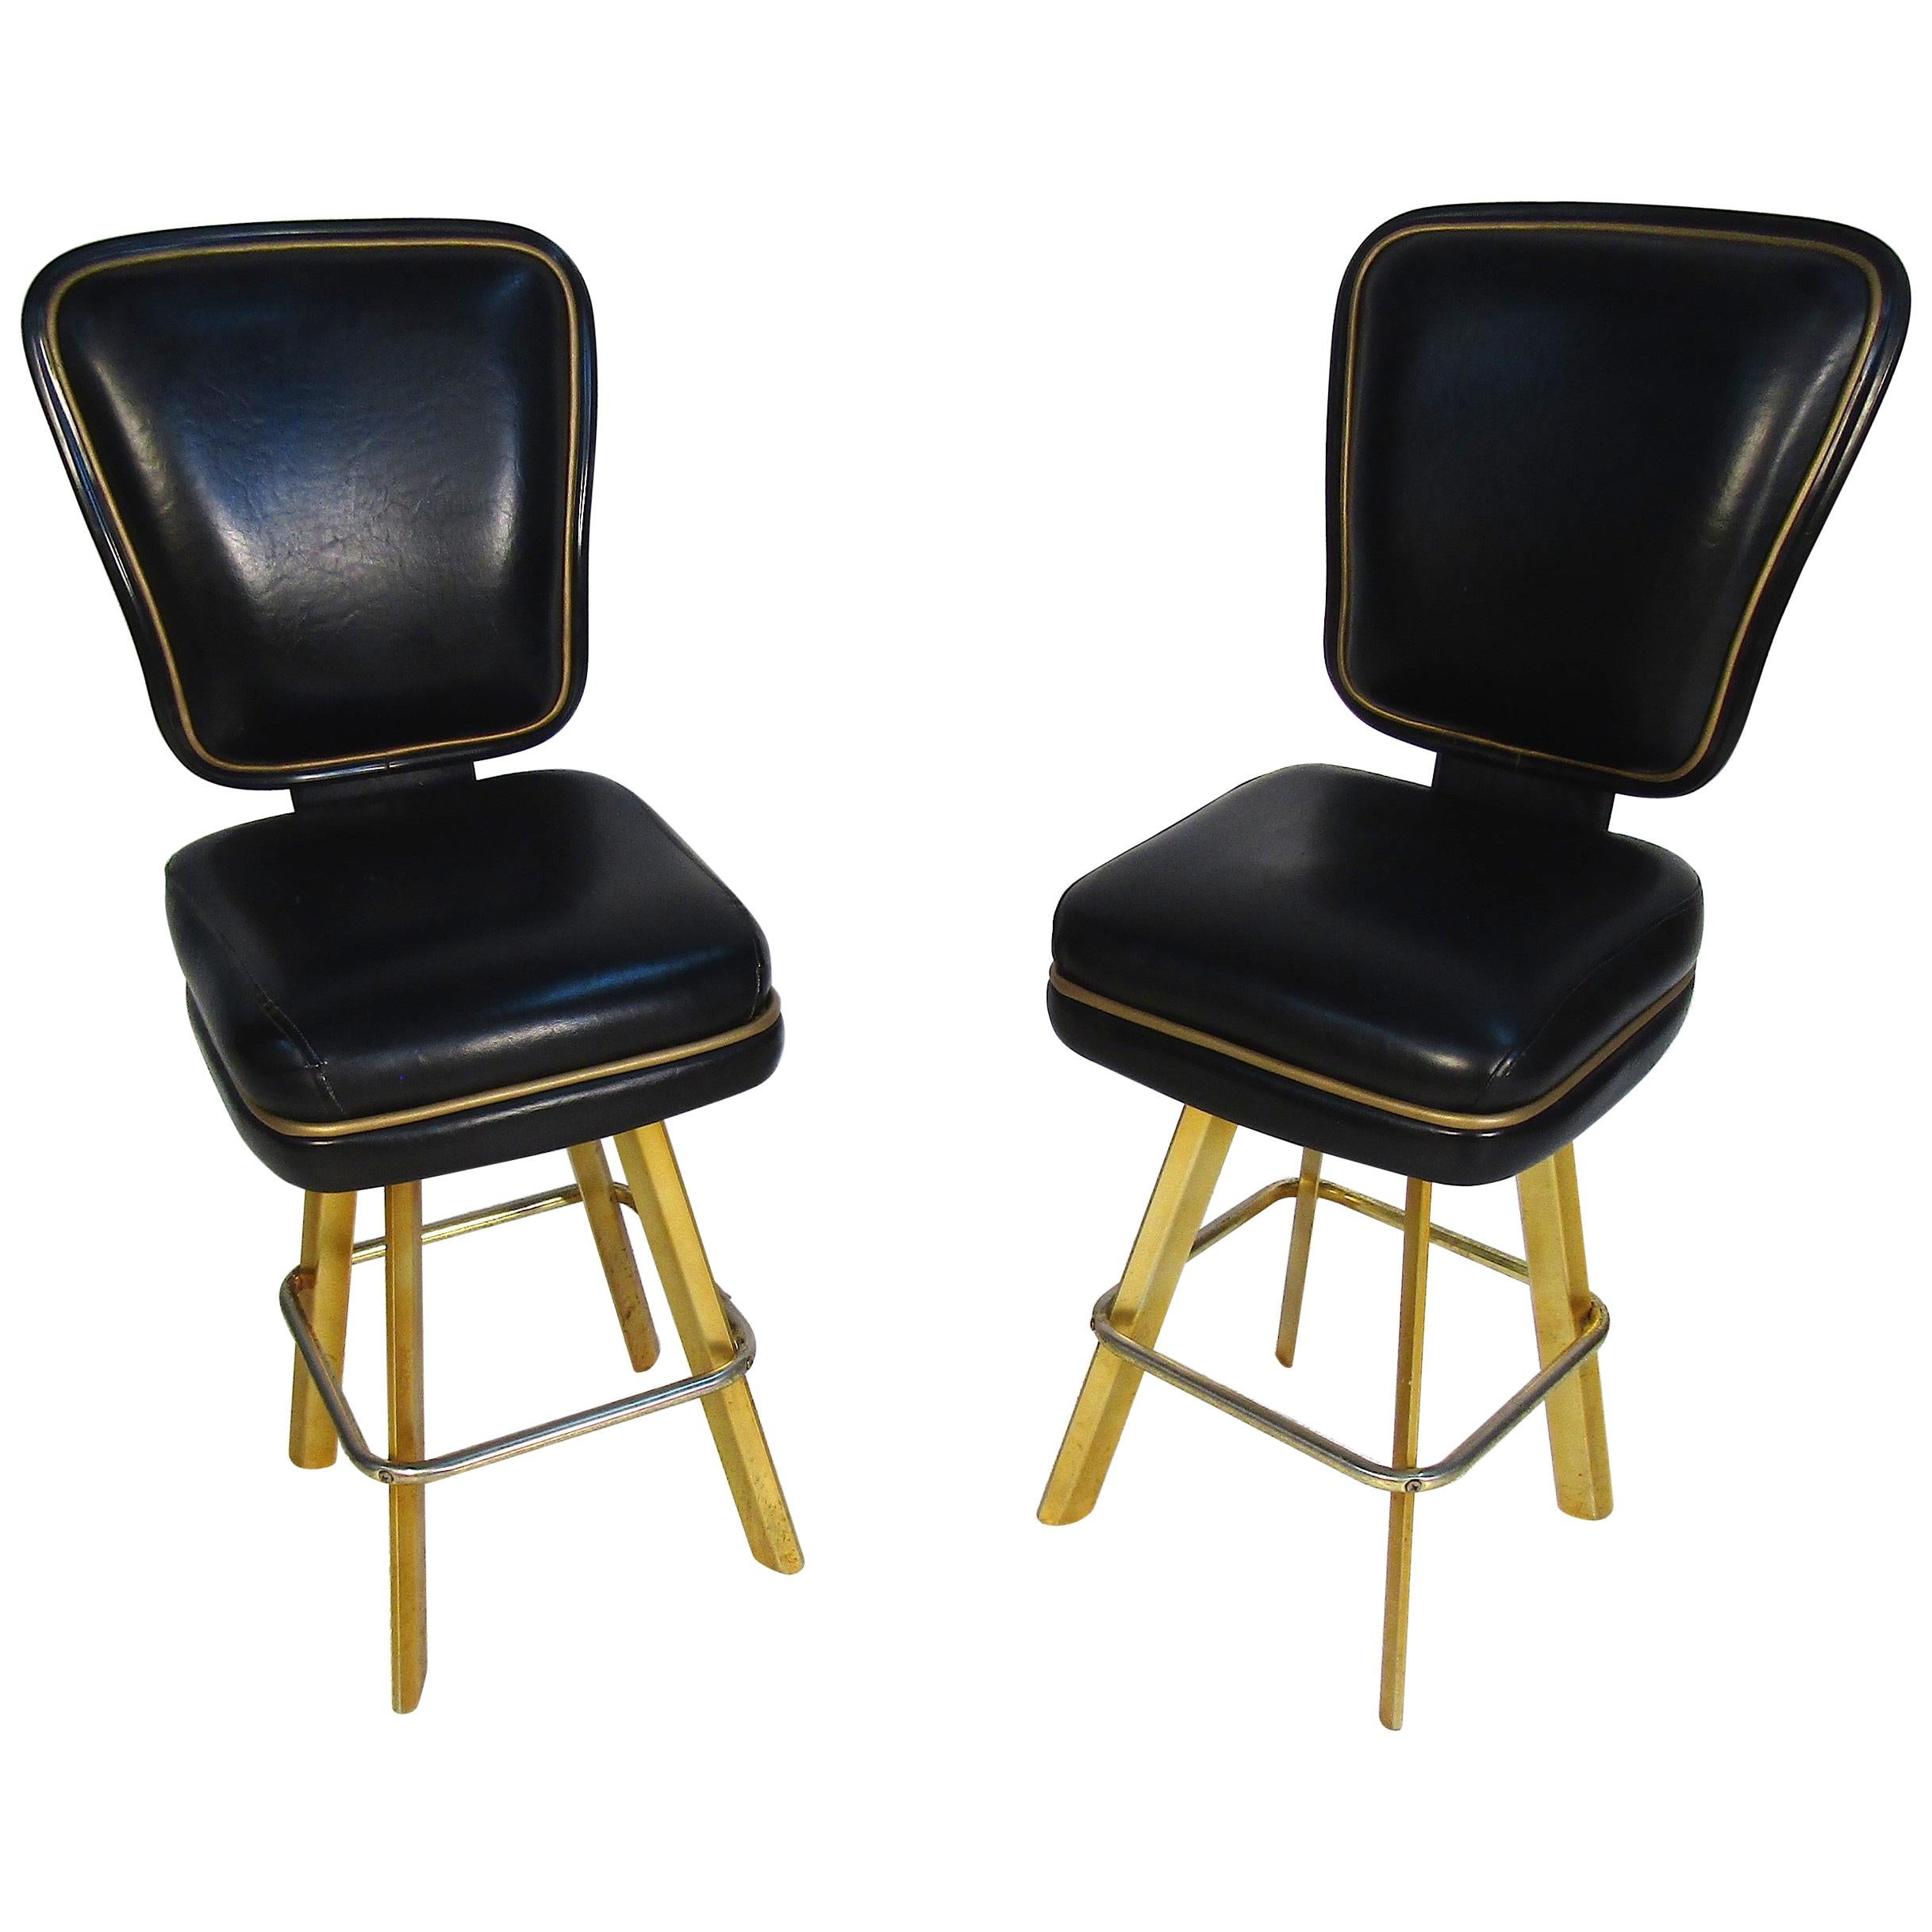 Pair of Trump Plaza Bar Stools For Sale